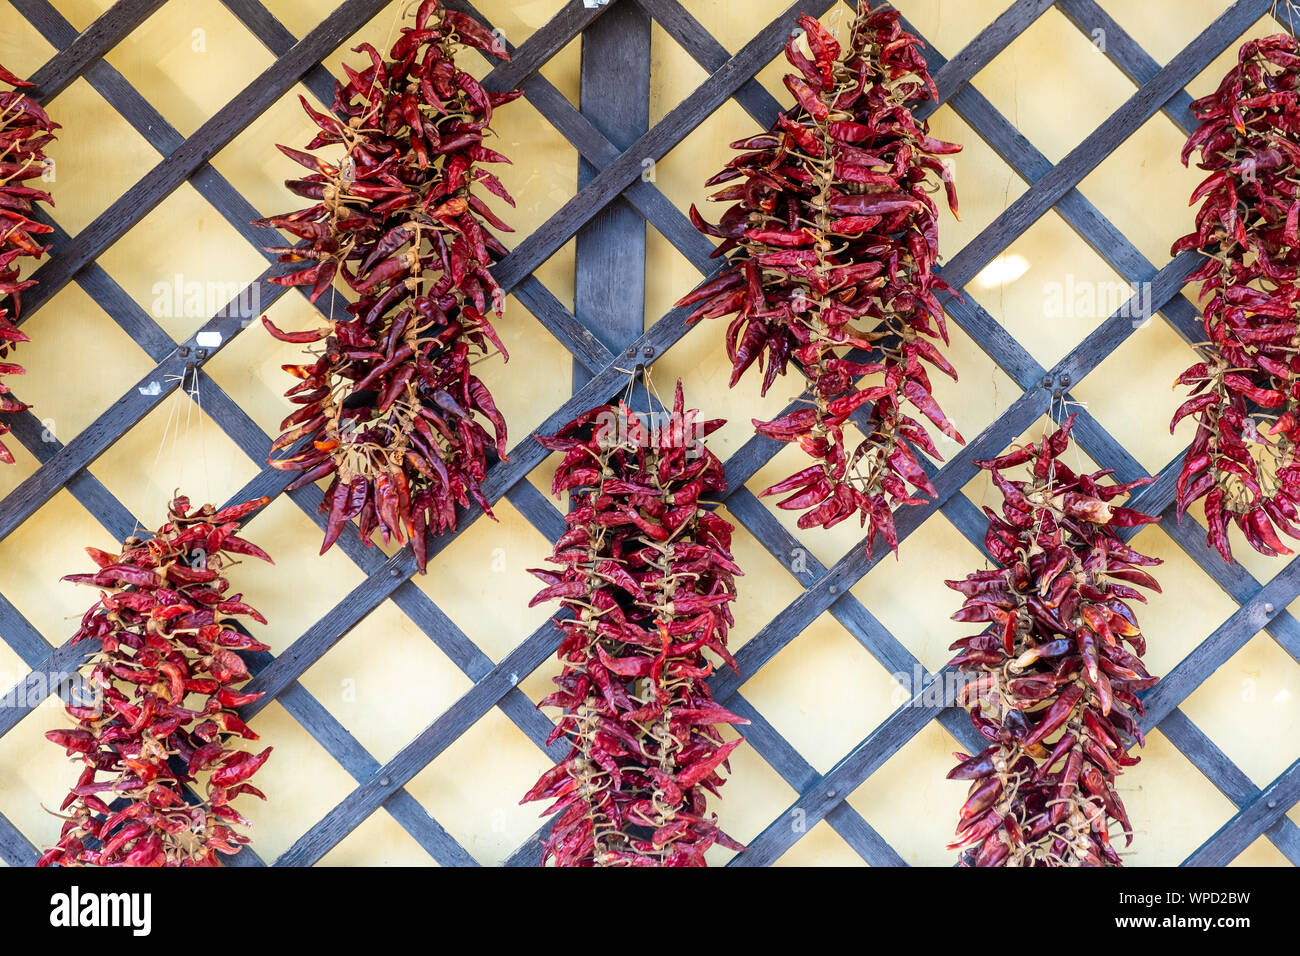 Red hot chilly pepper drying on wire Stock Photo